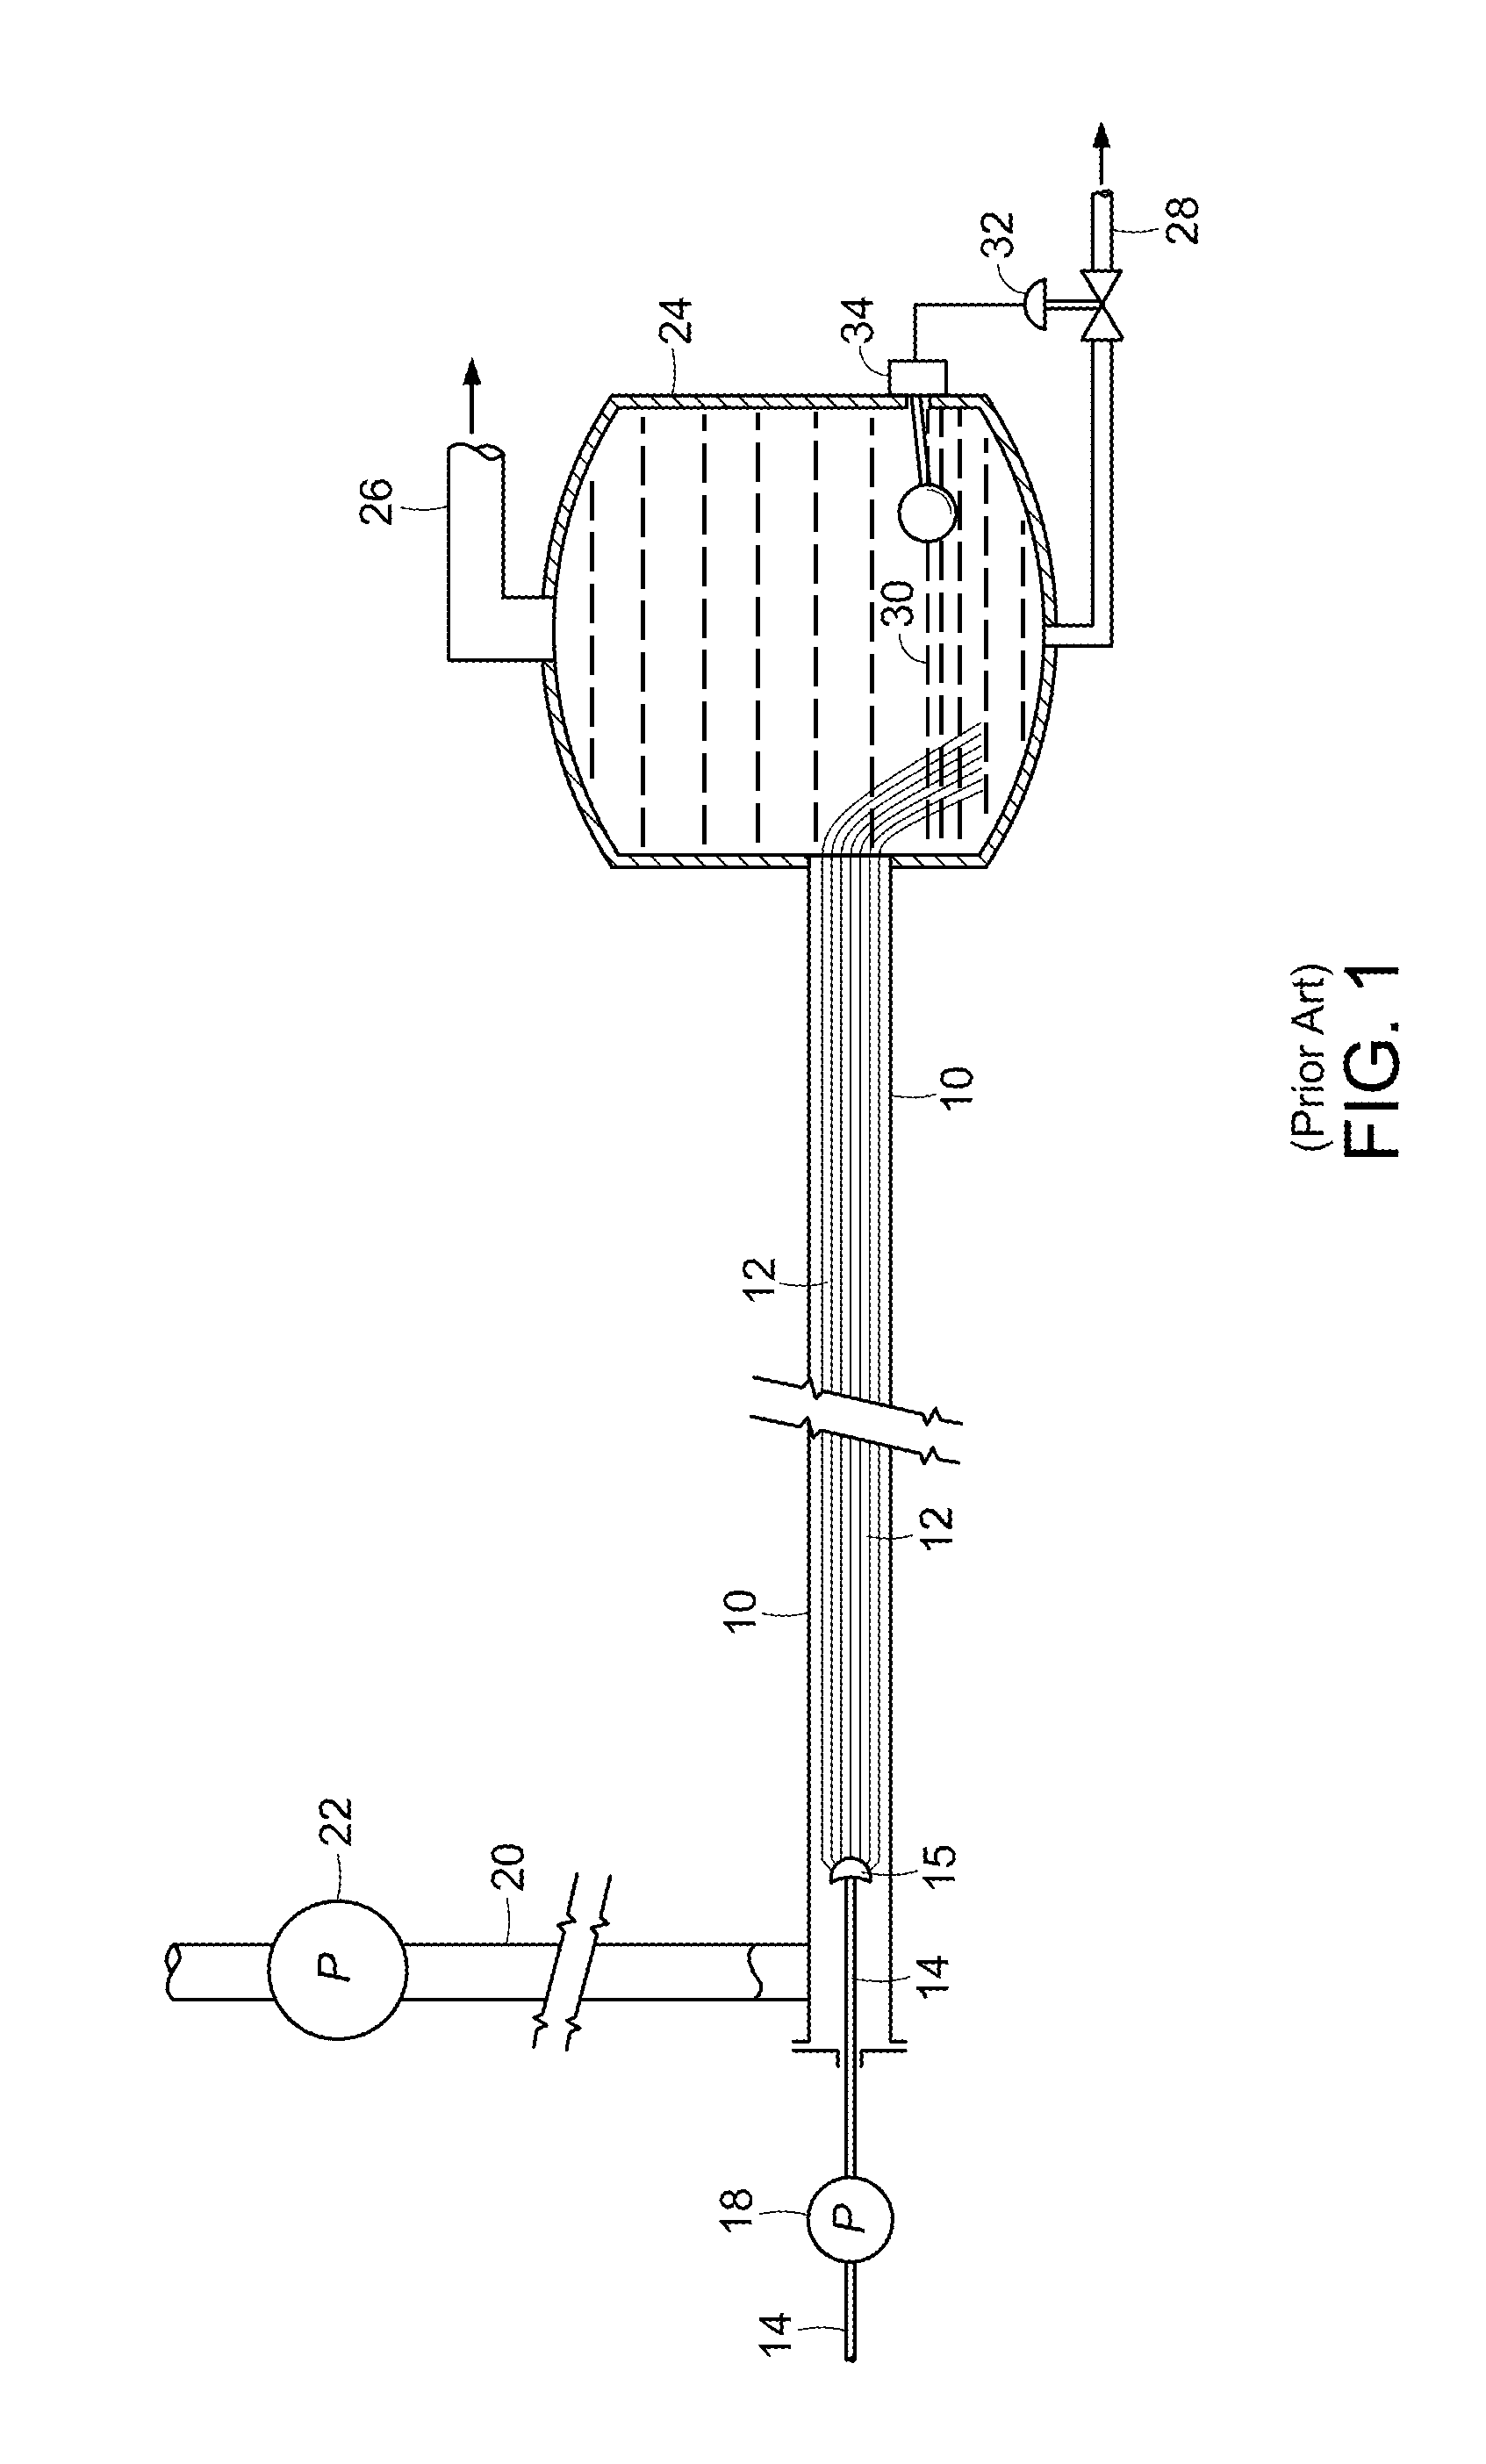 Method and system for production of a chemical commodity using a fiber conduit reactor